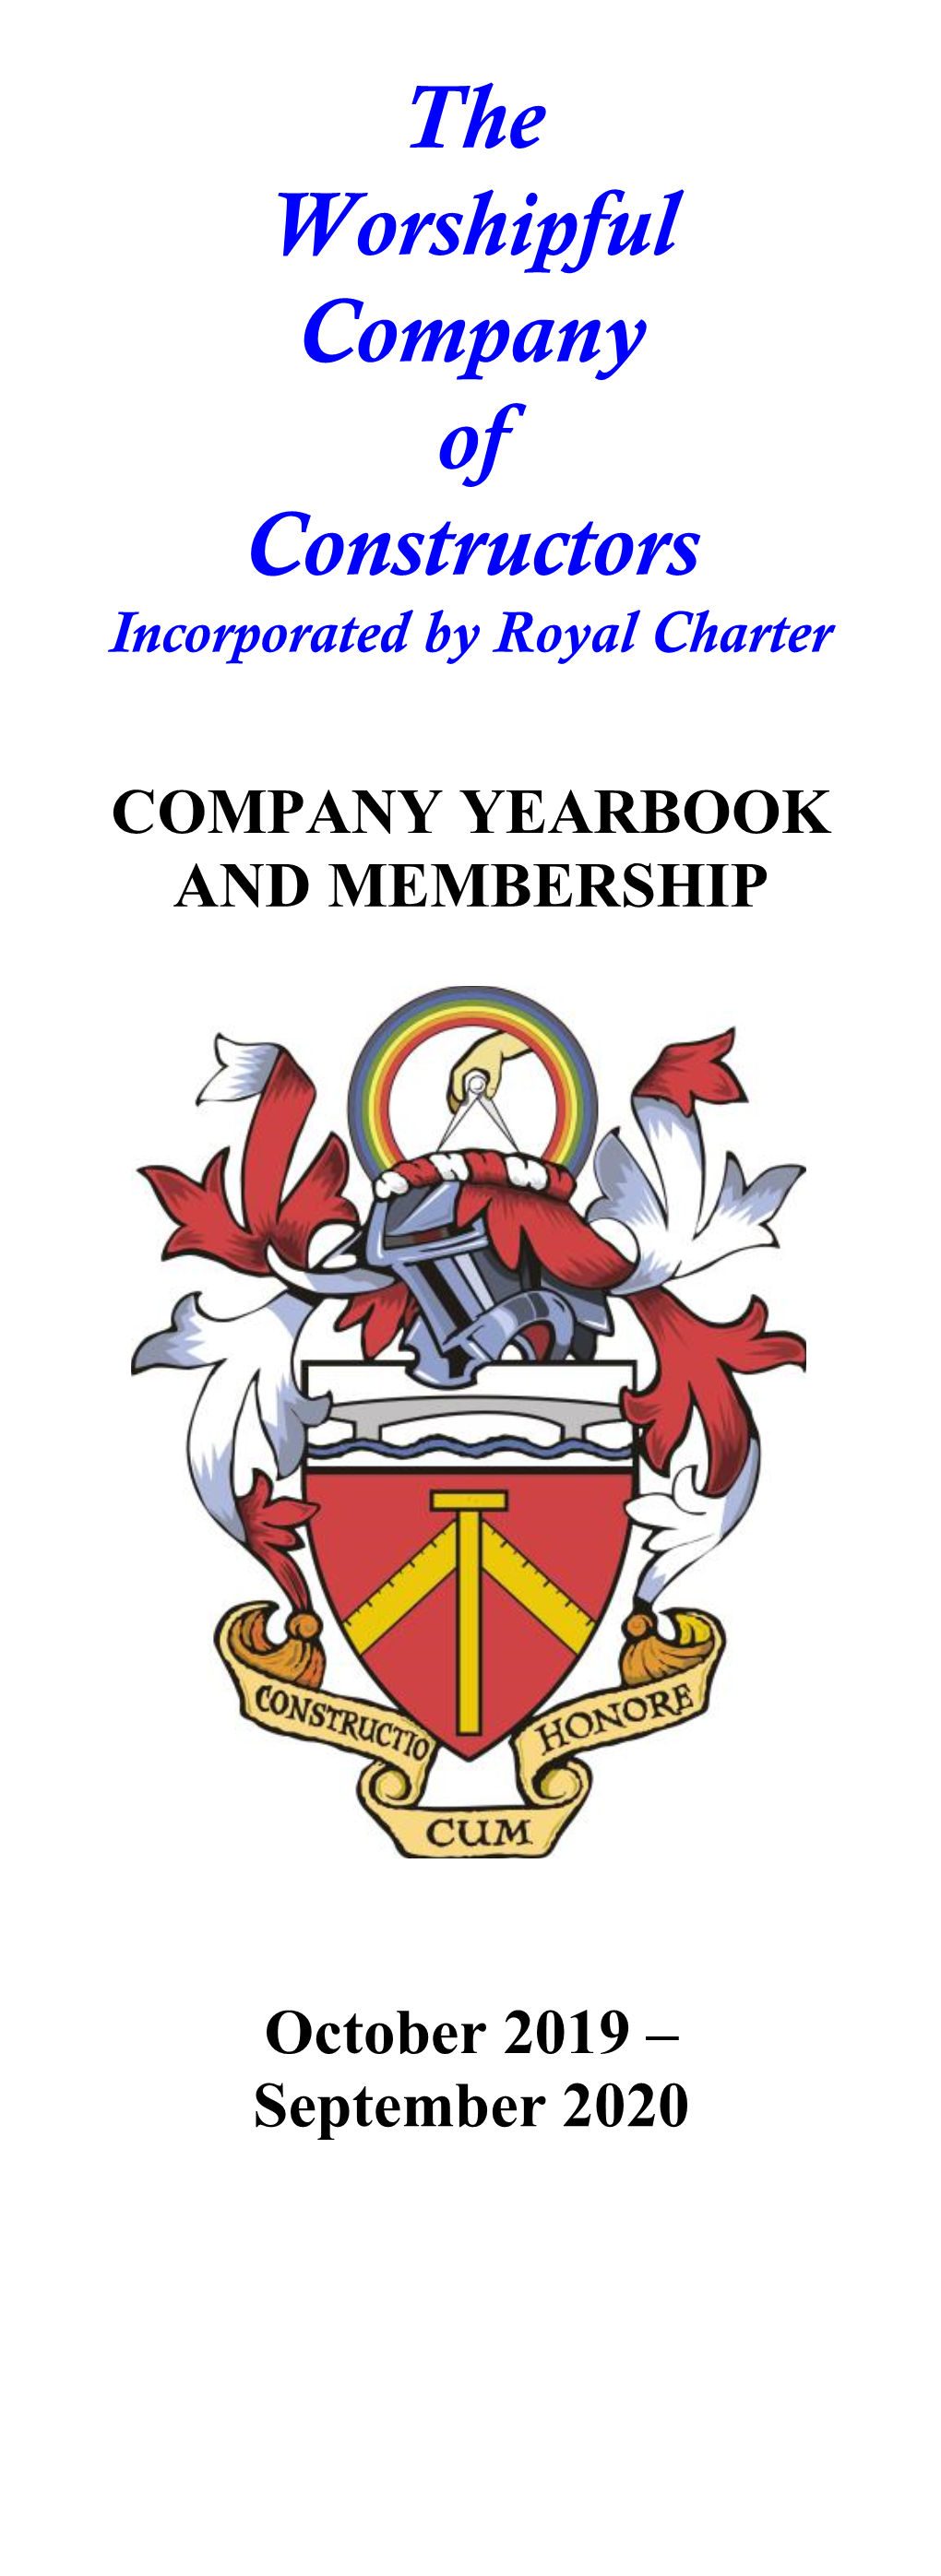 The Worshipful Company of Constructors Incorporated by Royal Charter